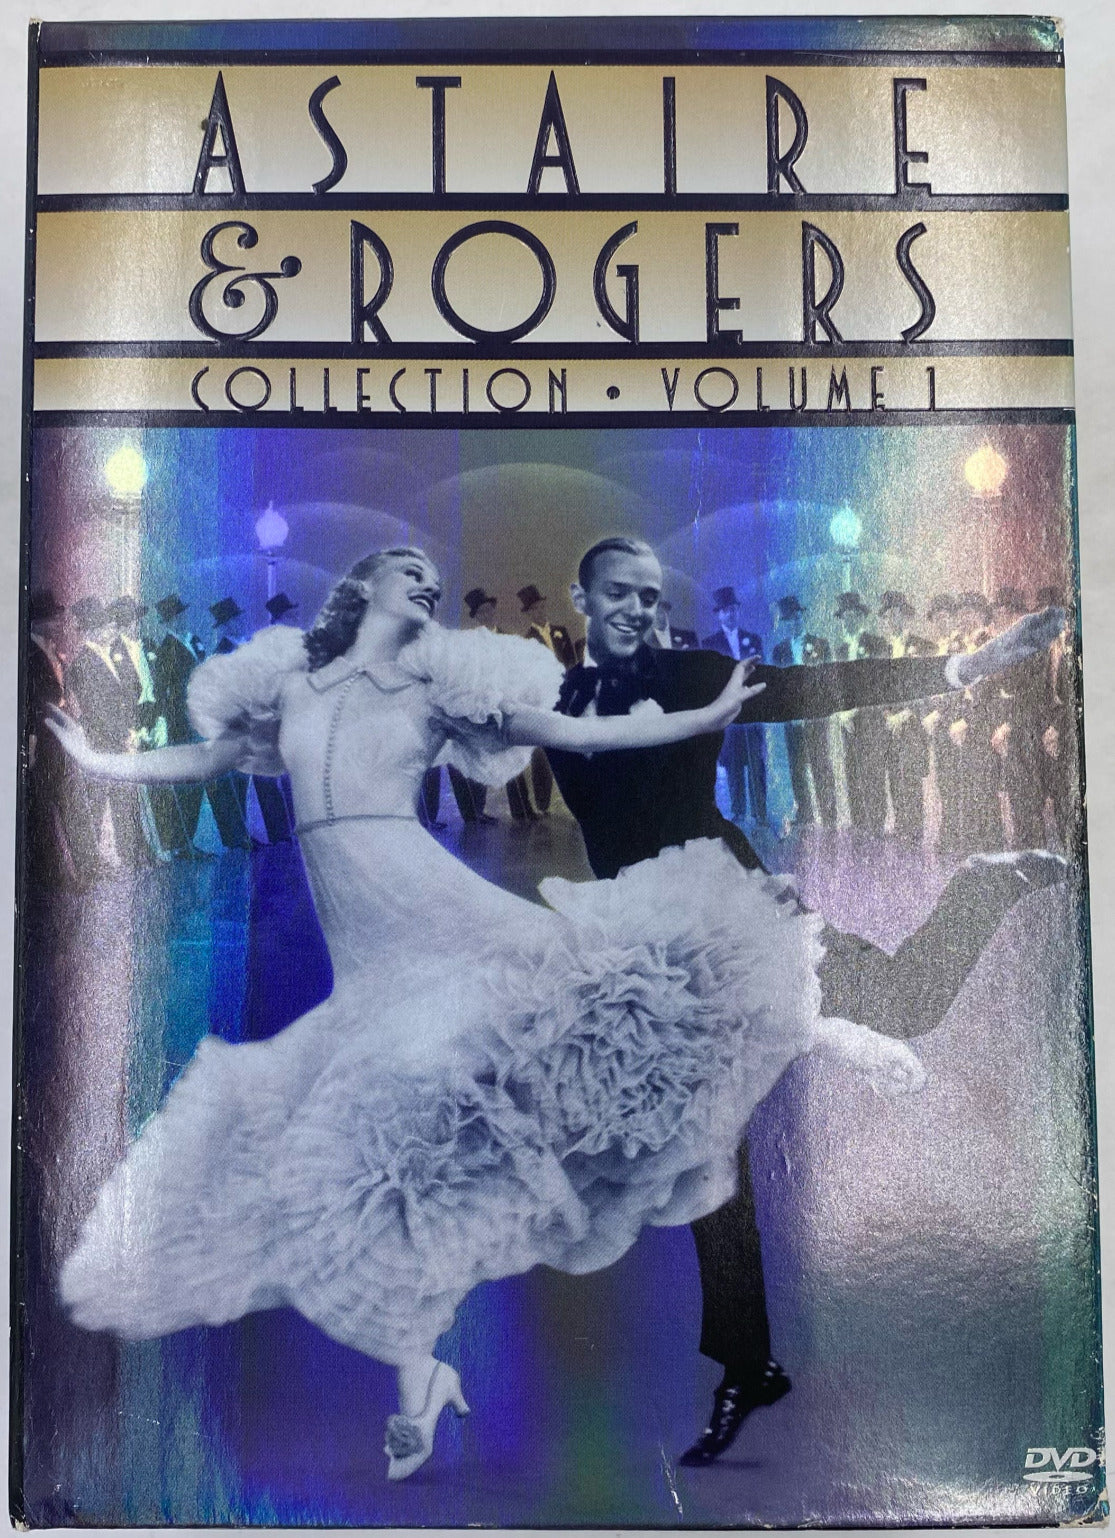 Astaire &  Rogers: The Signature Collection Vol. 1 (DVD, 2005, 5-Disc Set)